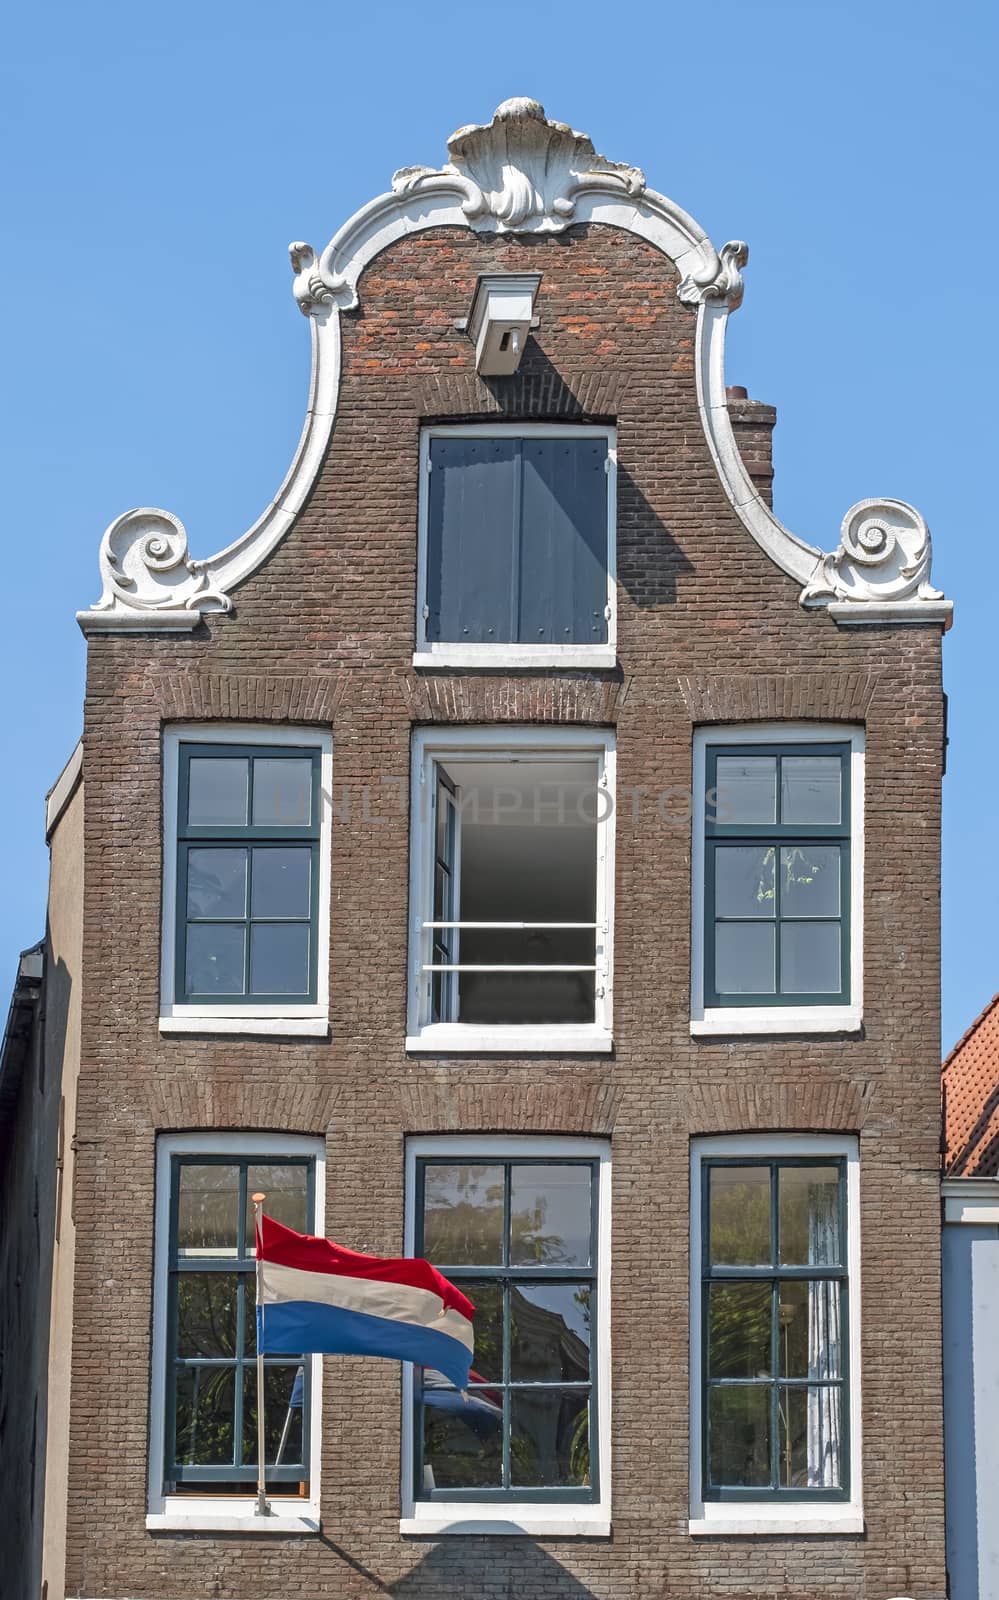 Medieval facades at the Prinsengracht in Amsterdam Netherlands at Kingsday